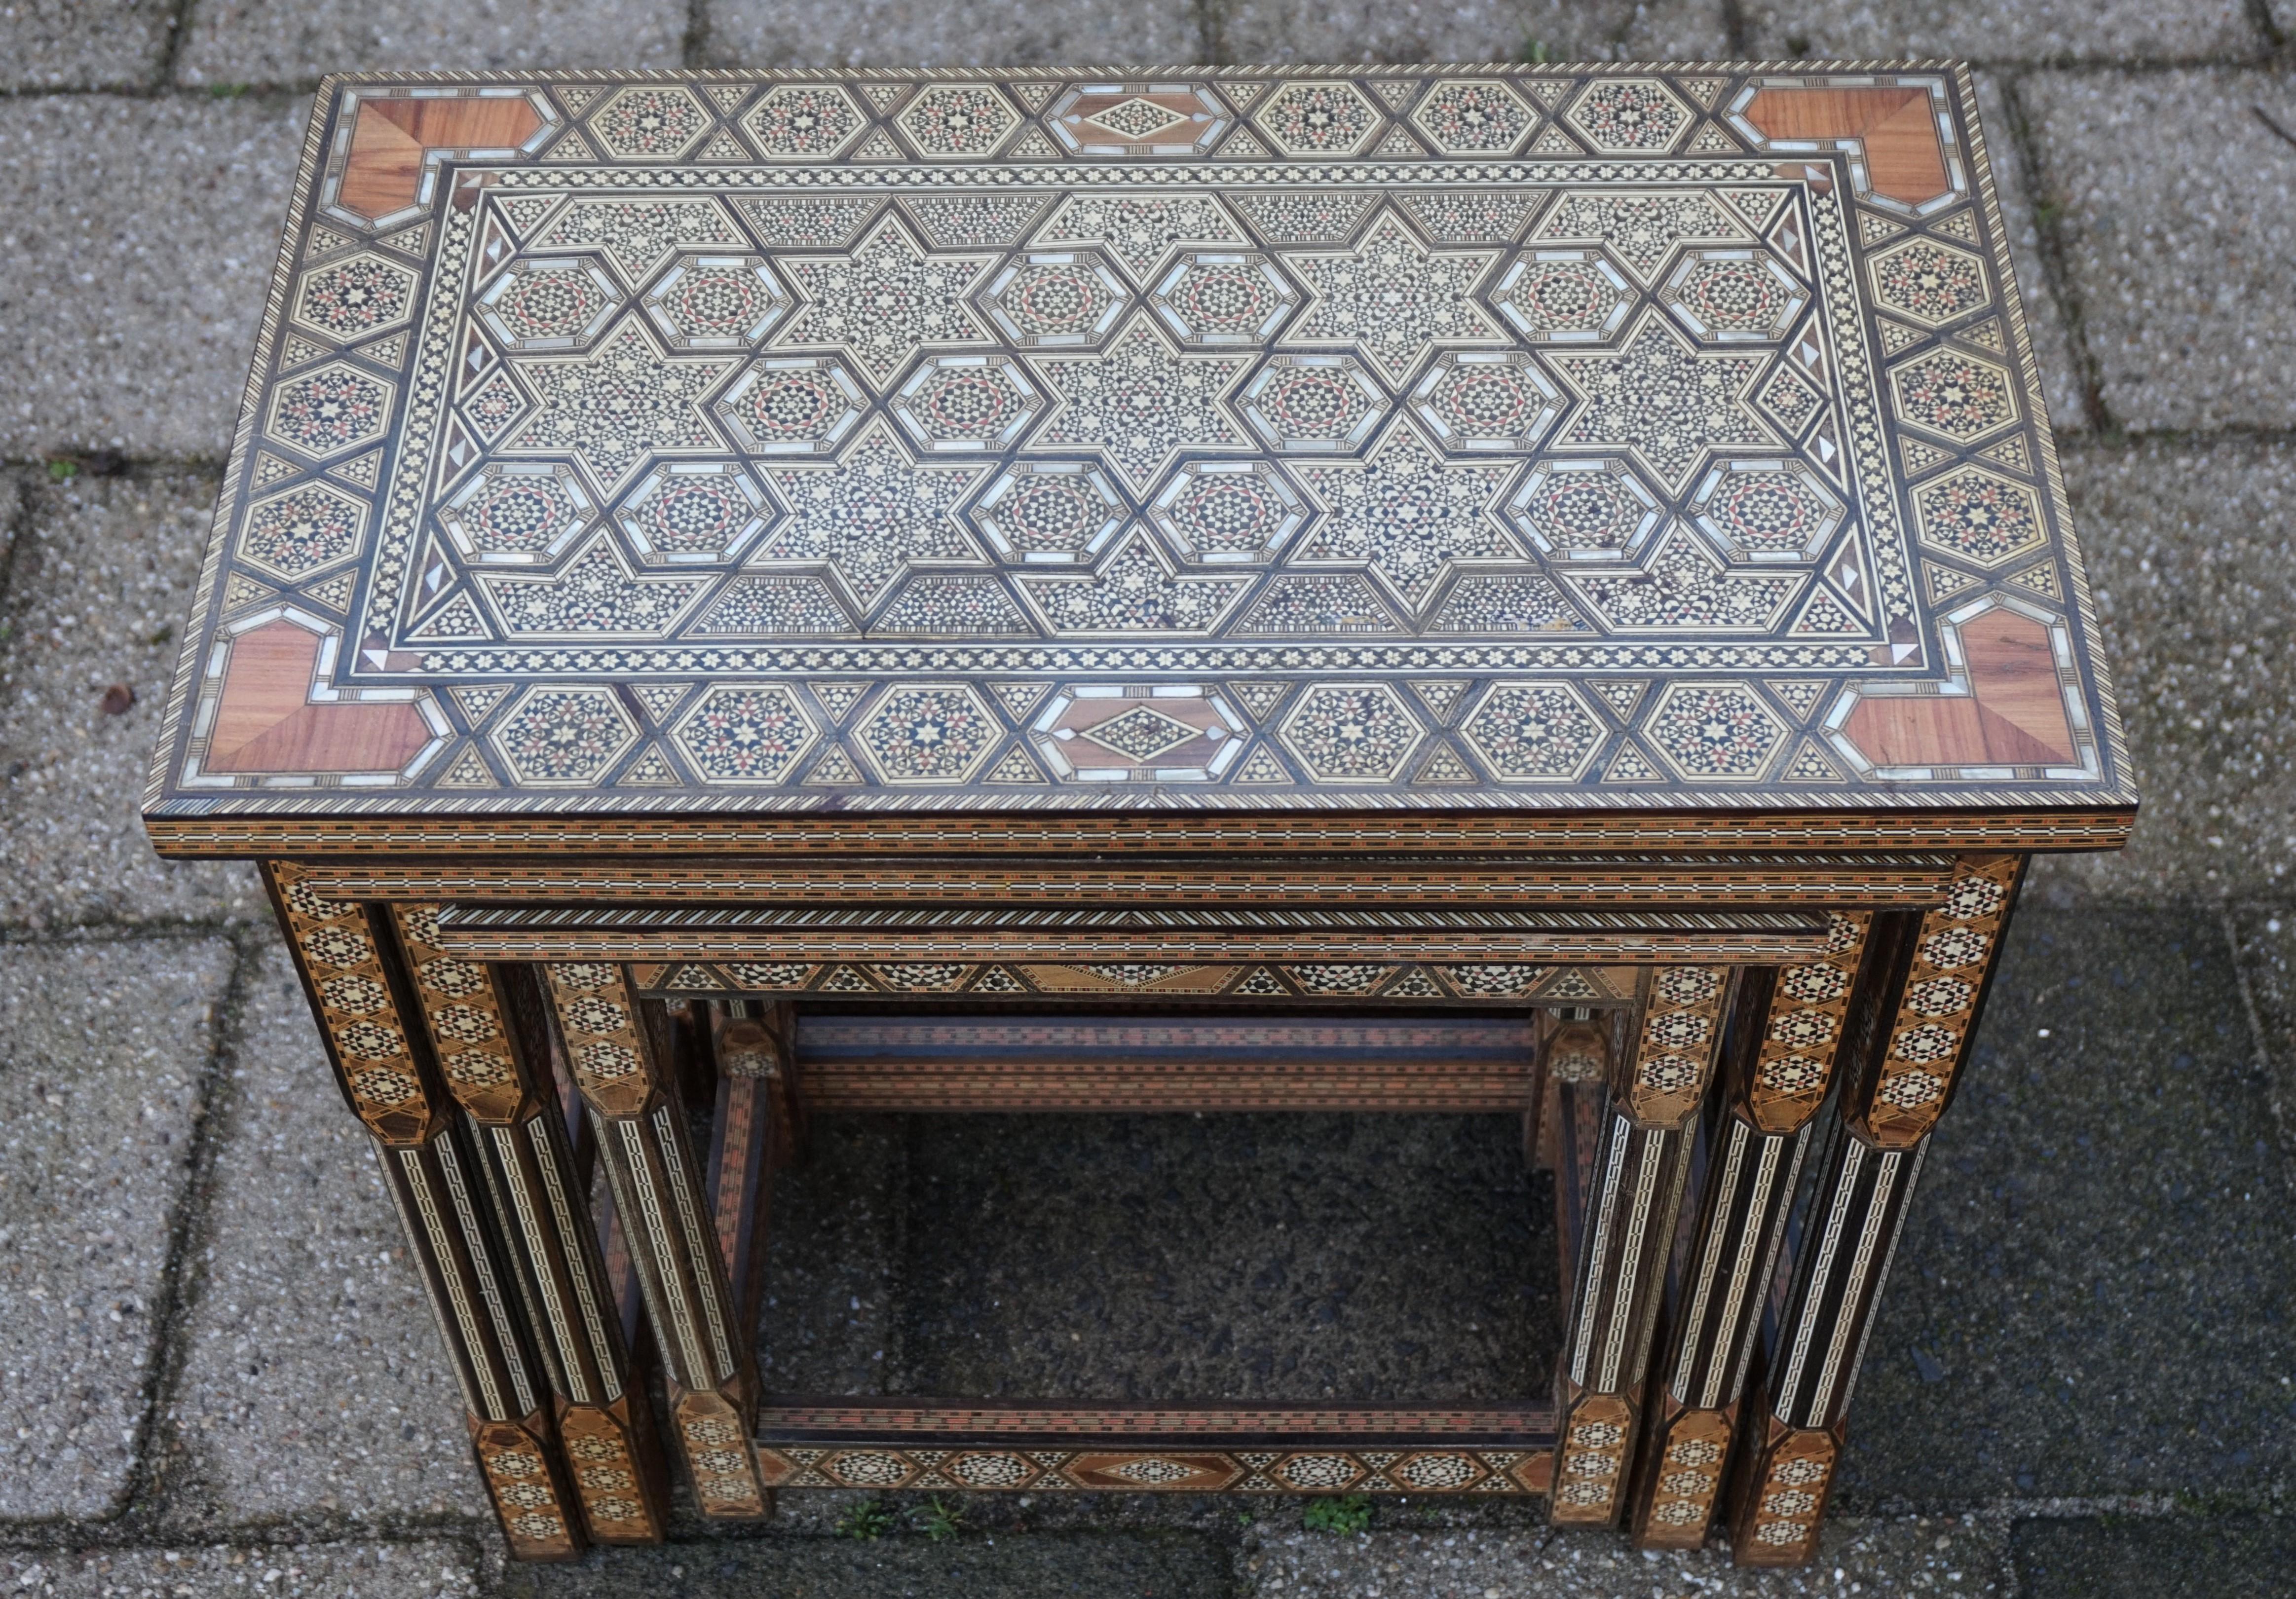 Hand-Crafted Vintage Handcrafted Moorish Nest of Tables with Amazing Number of Inlaid Motifs